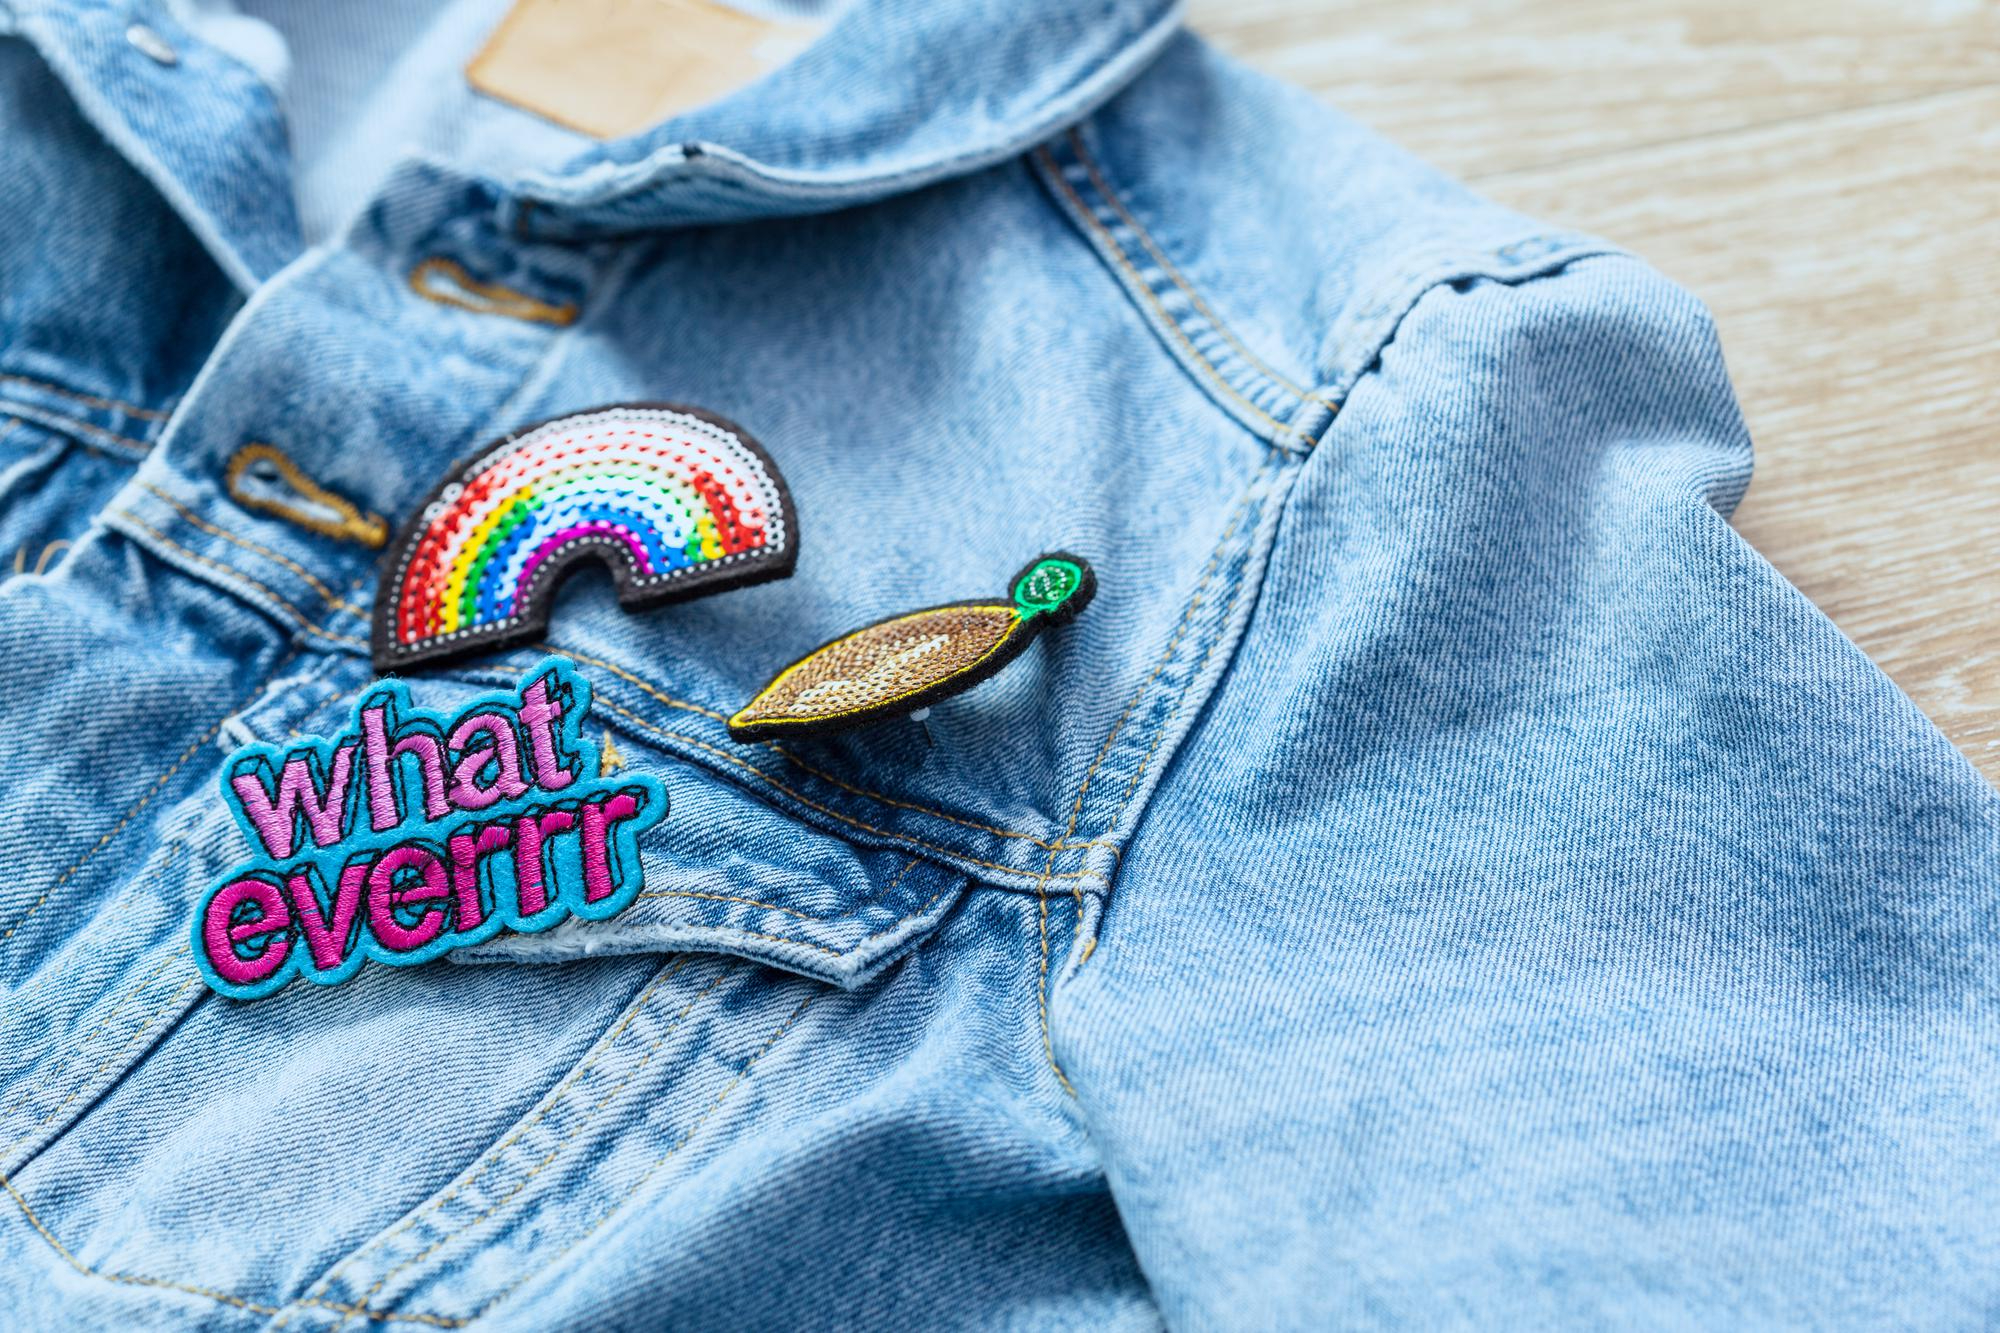 Crafting Personalized Style: A Guide to Creating Cool Patches for Your Denim Jacket